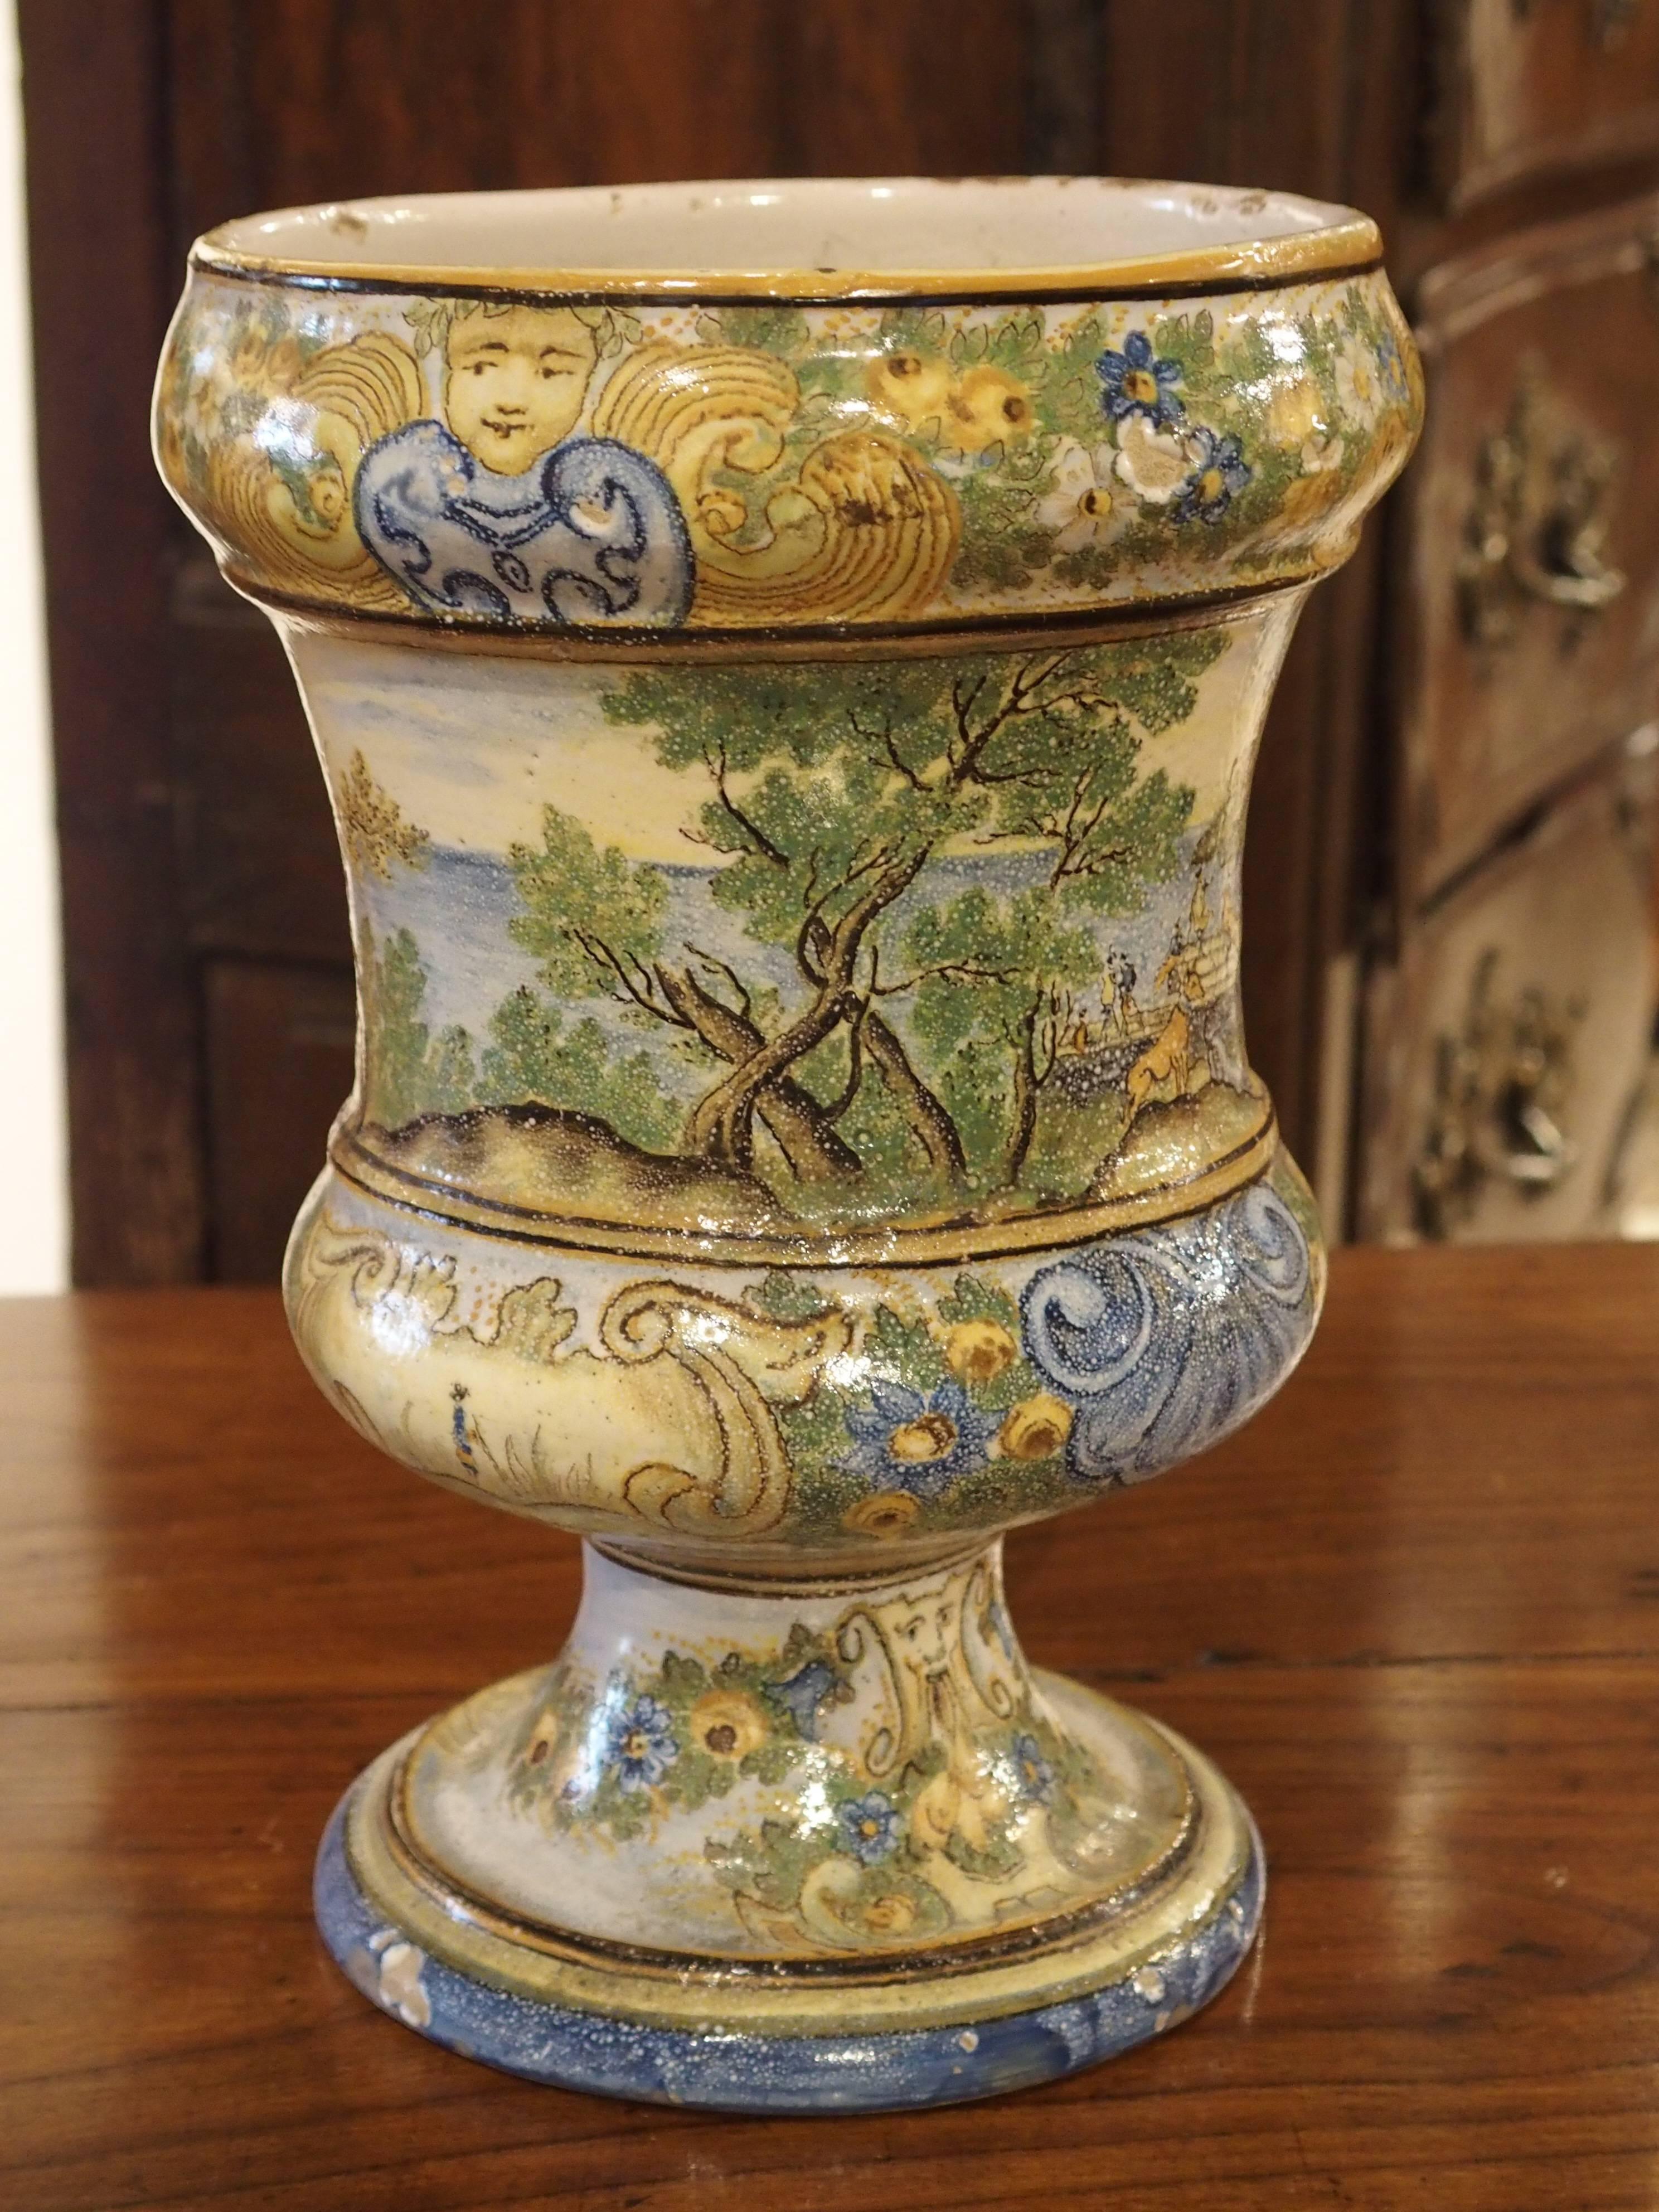 Hand-Painted Small Antique Ceramic Urn from Italy, Early 1800s